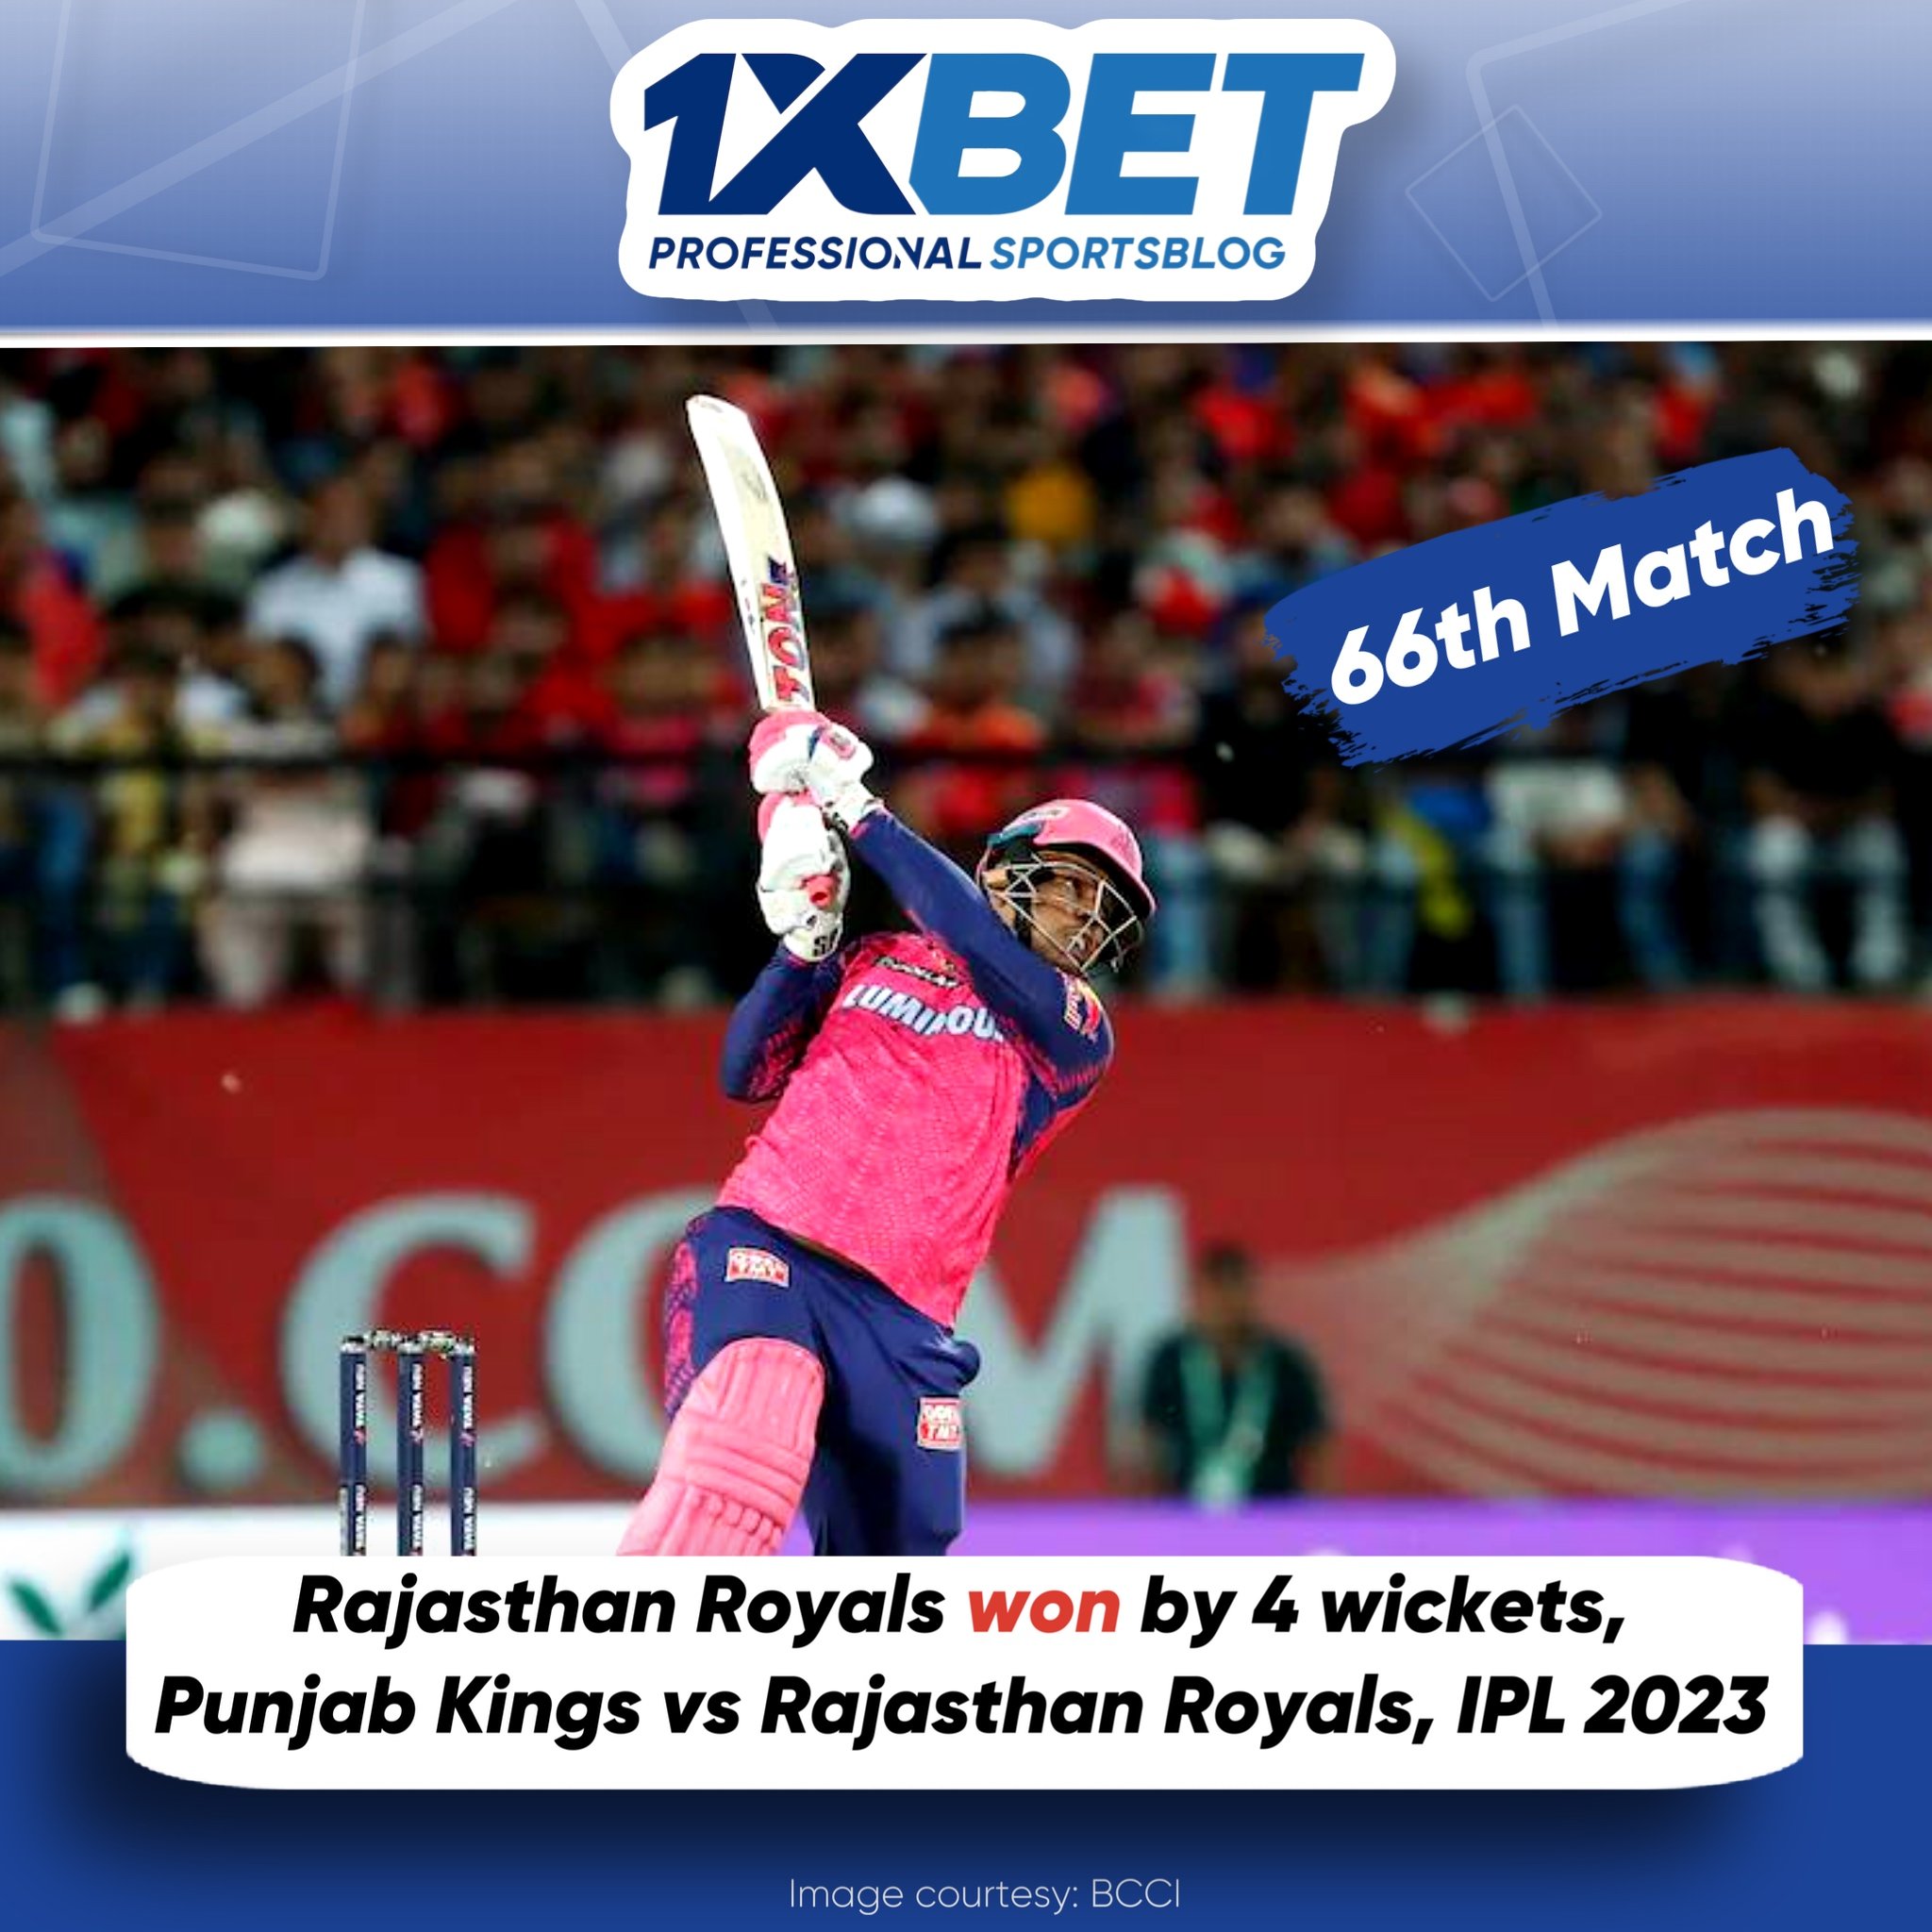 Rajasthan Royals won by 4 wickets